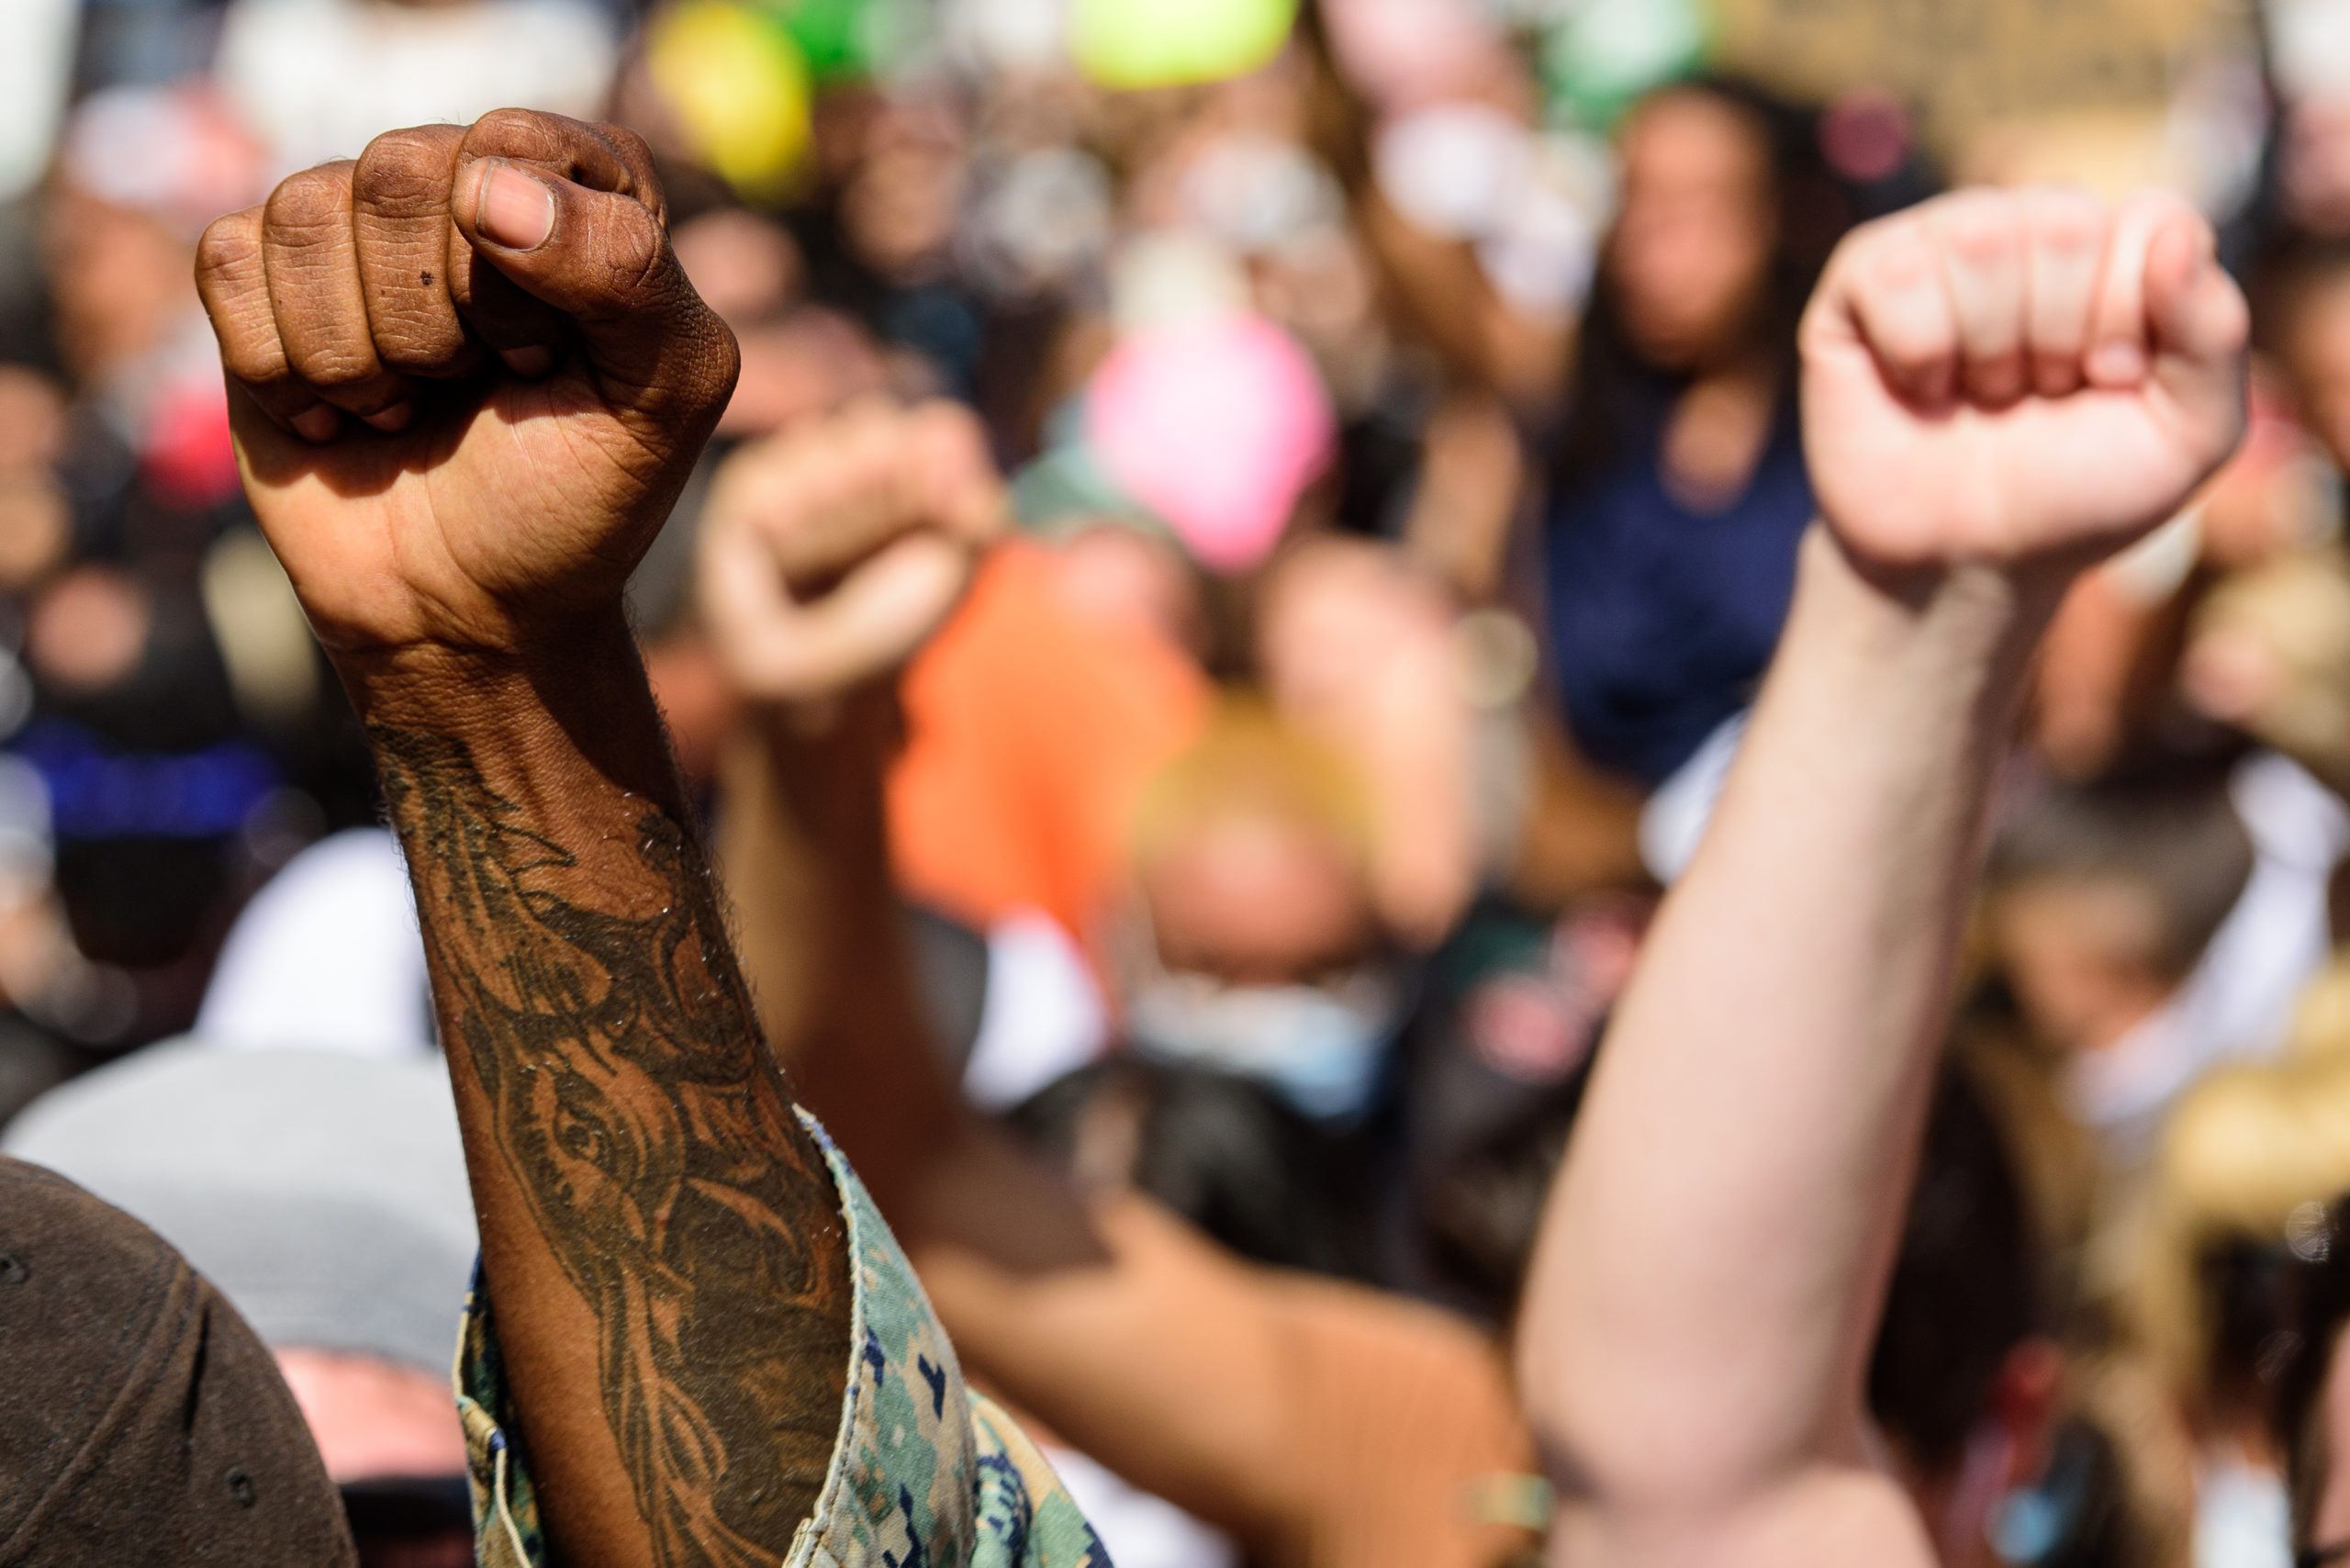 2020 Top Stories #3: Black Lives Matter and social justice movements